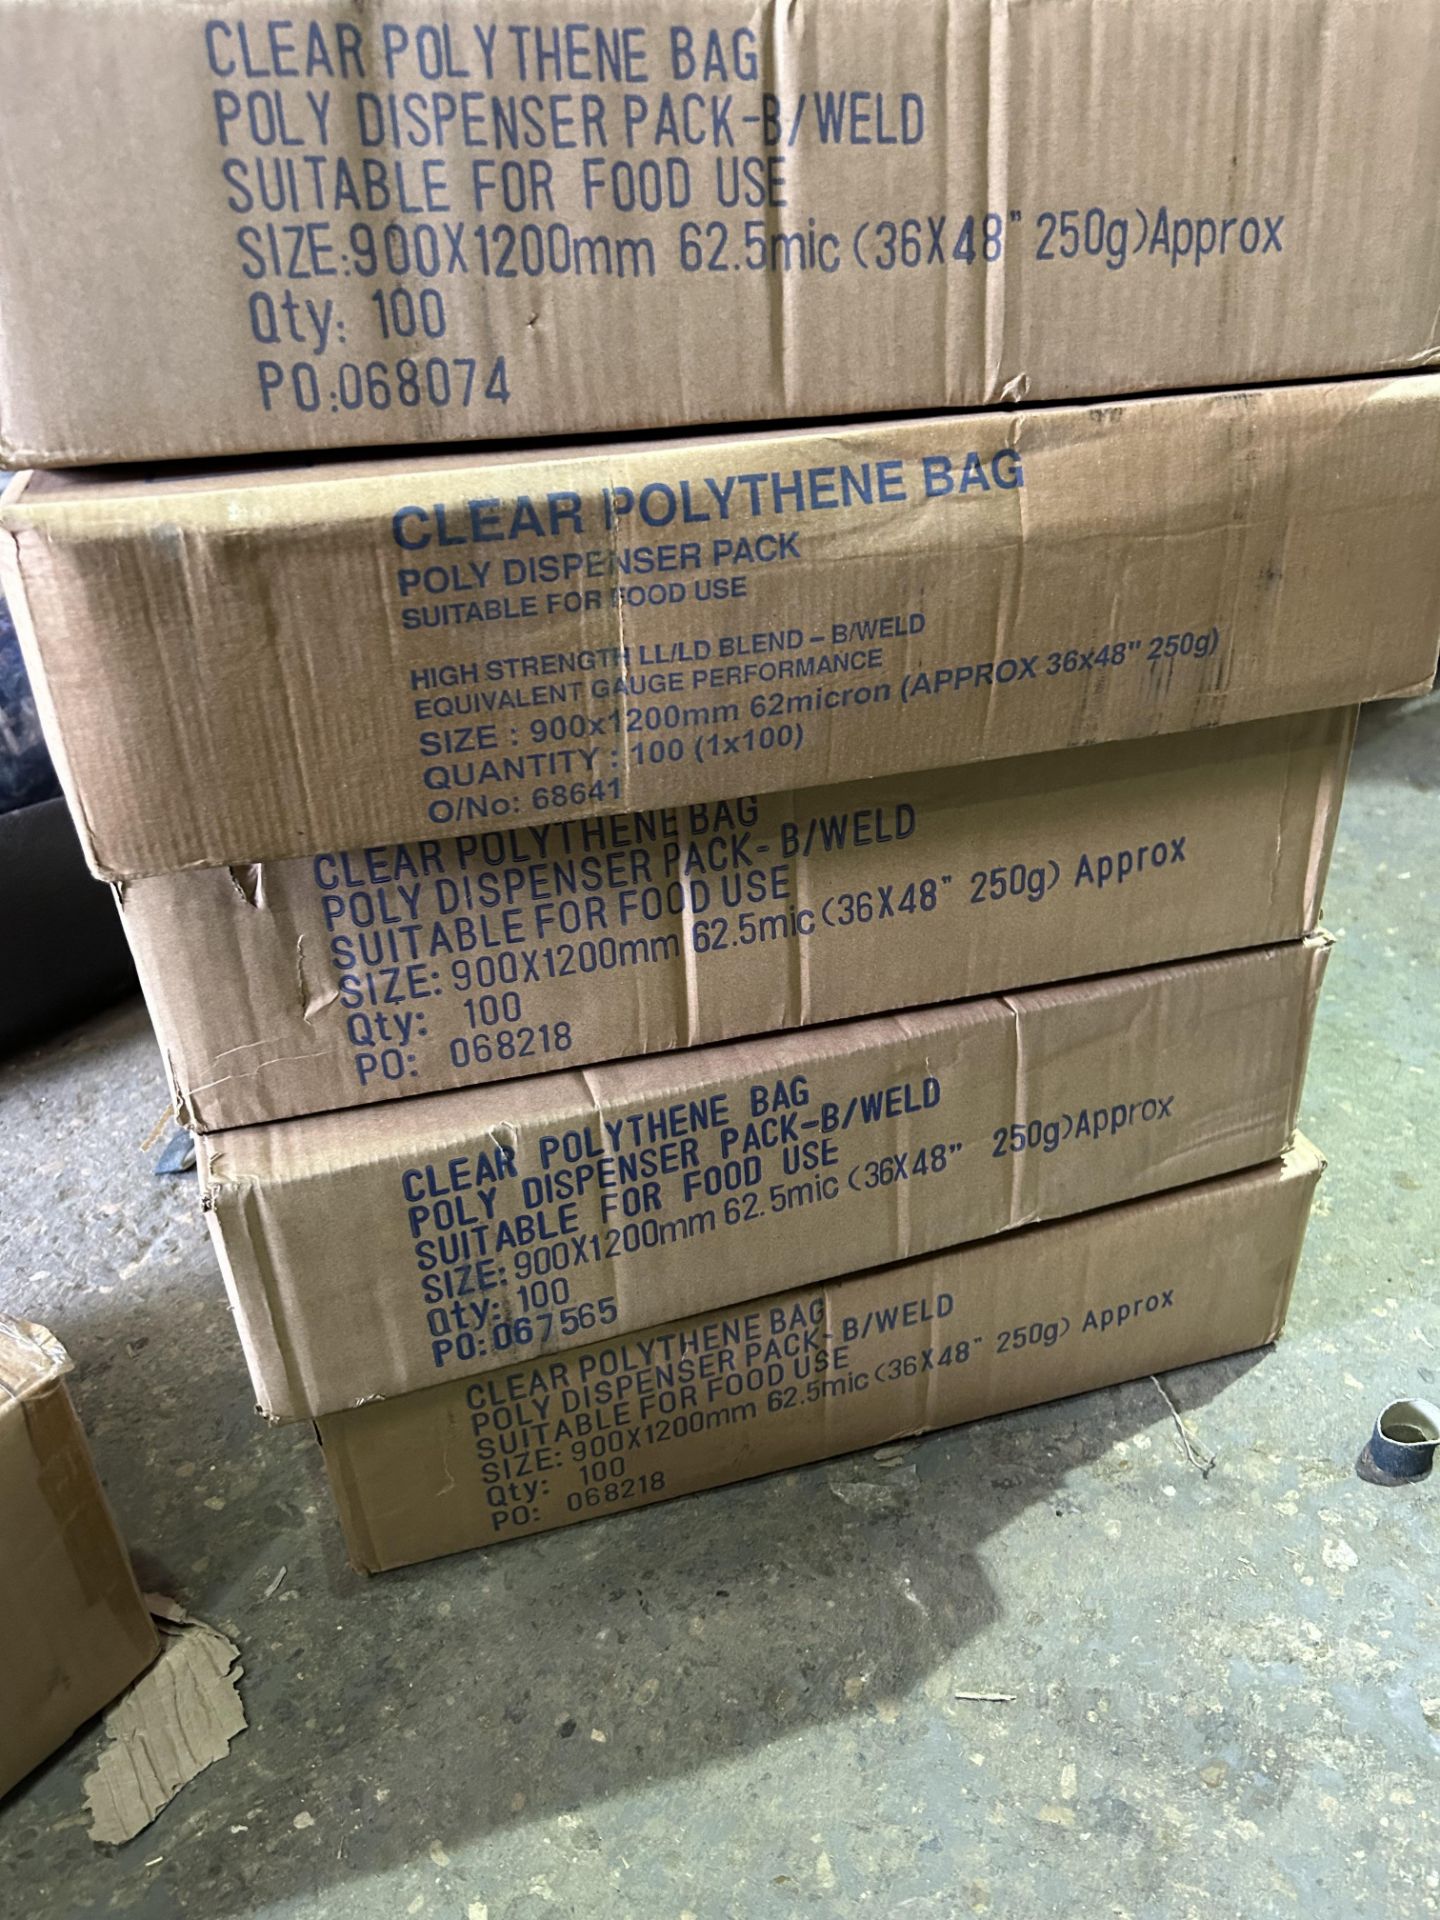 5 BOXES OF CLEAR POLYTHENE BAGS BOTTOMWELD PACKAGING SUITABLE FOR FOOD USE 900x1200mm 62.5 micron